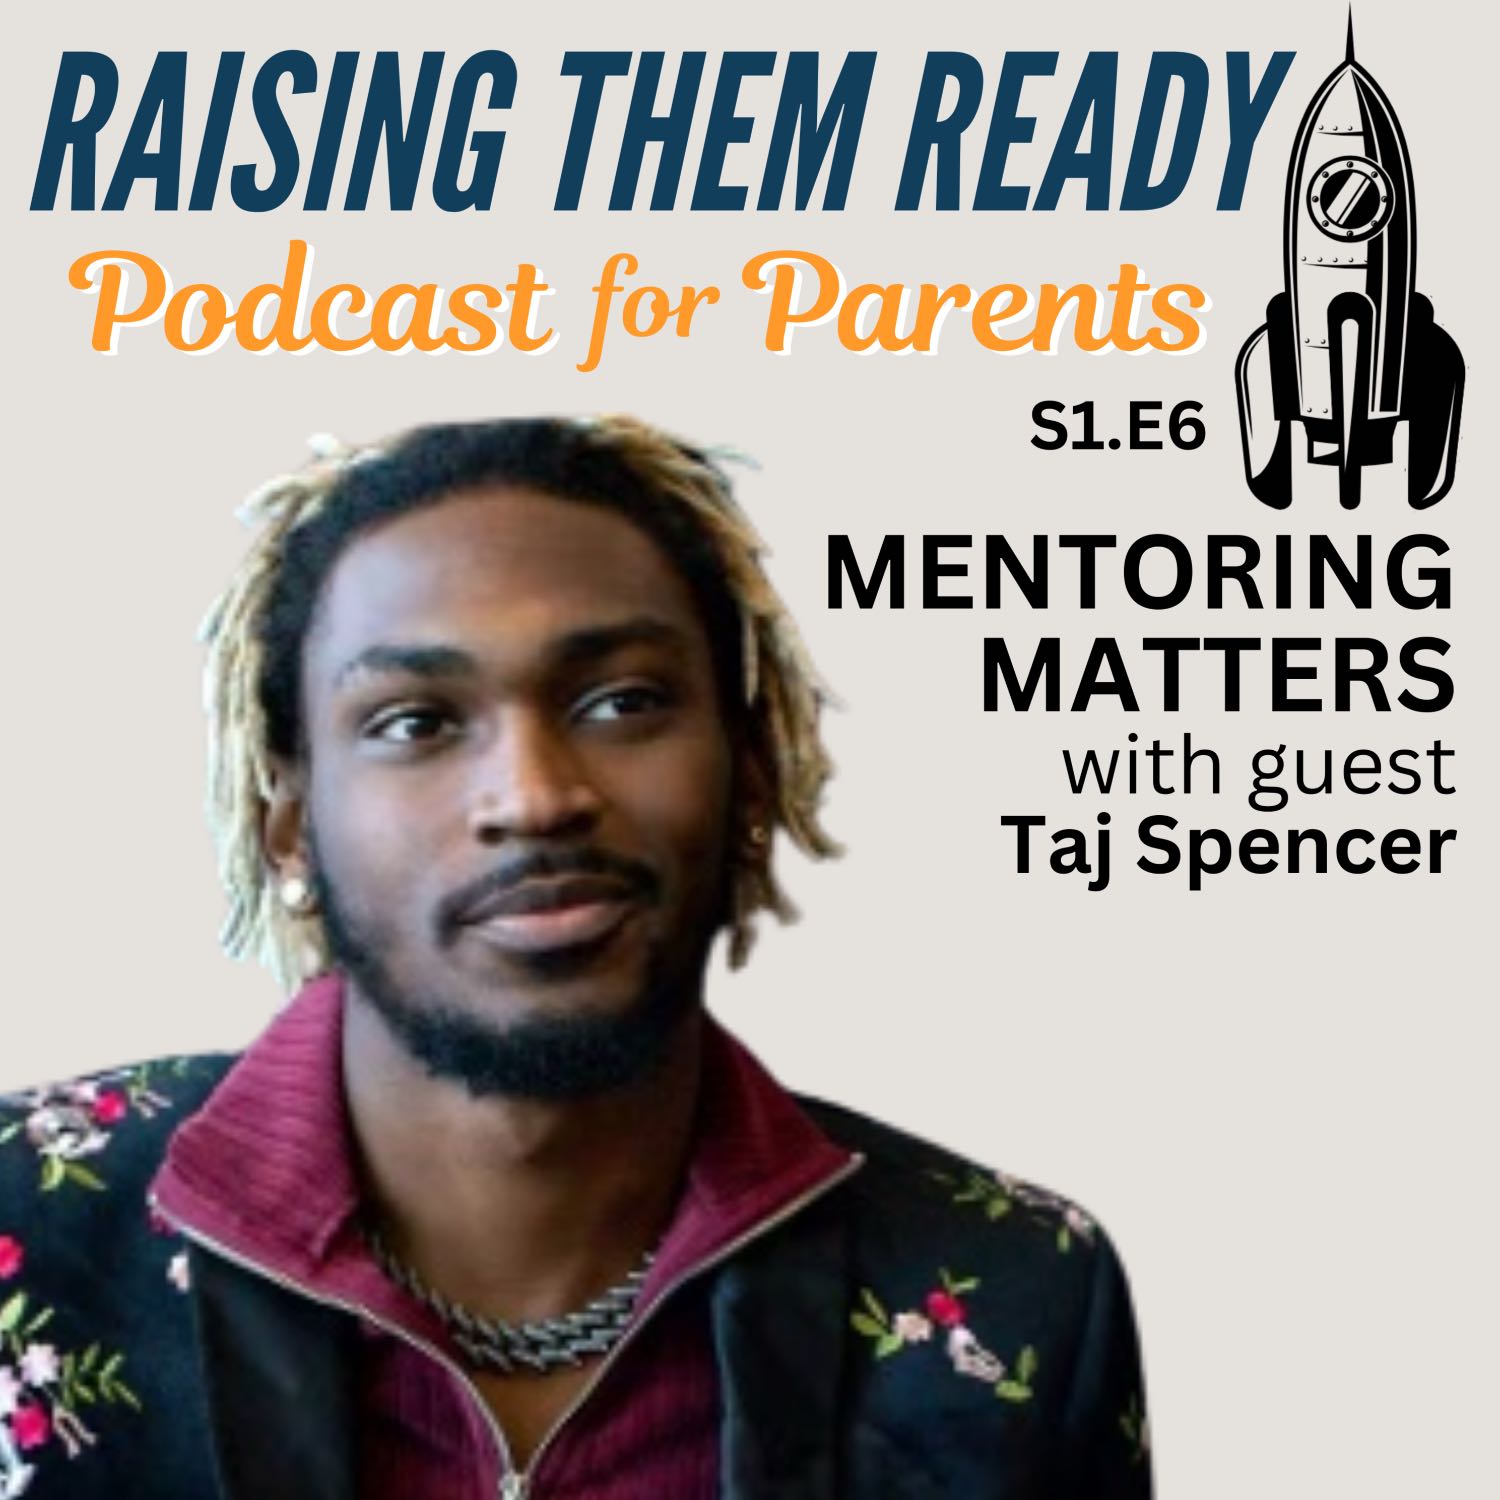 Mentoring Matters, with guest Taj Spencer